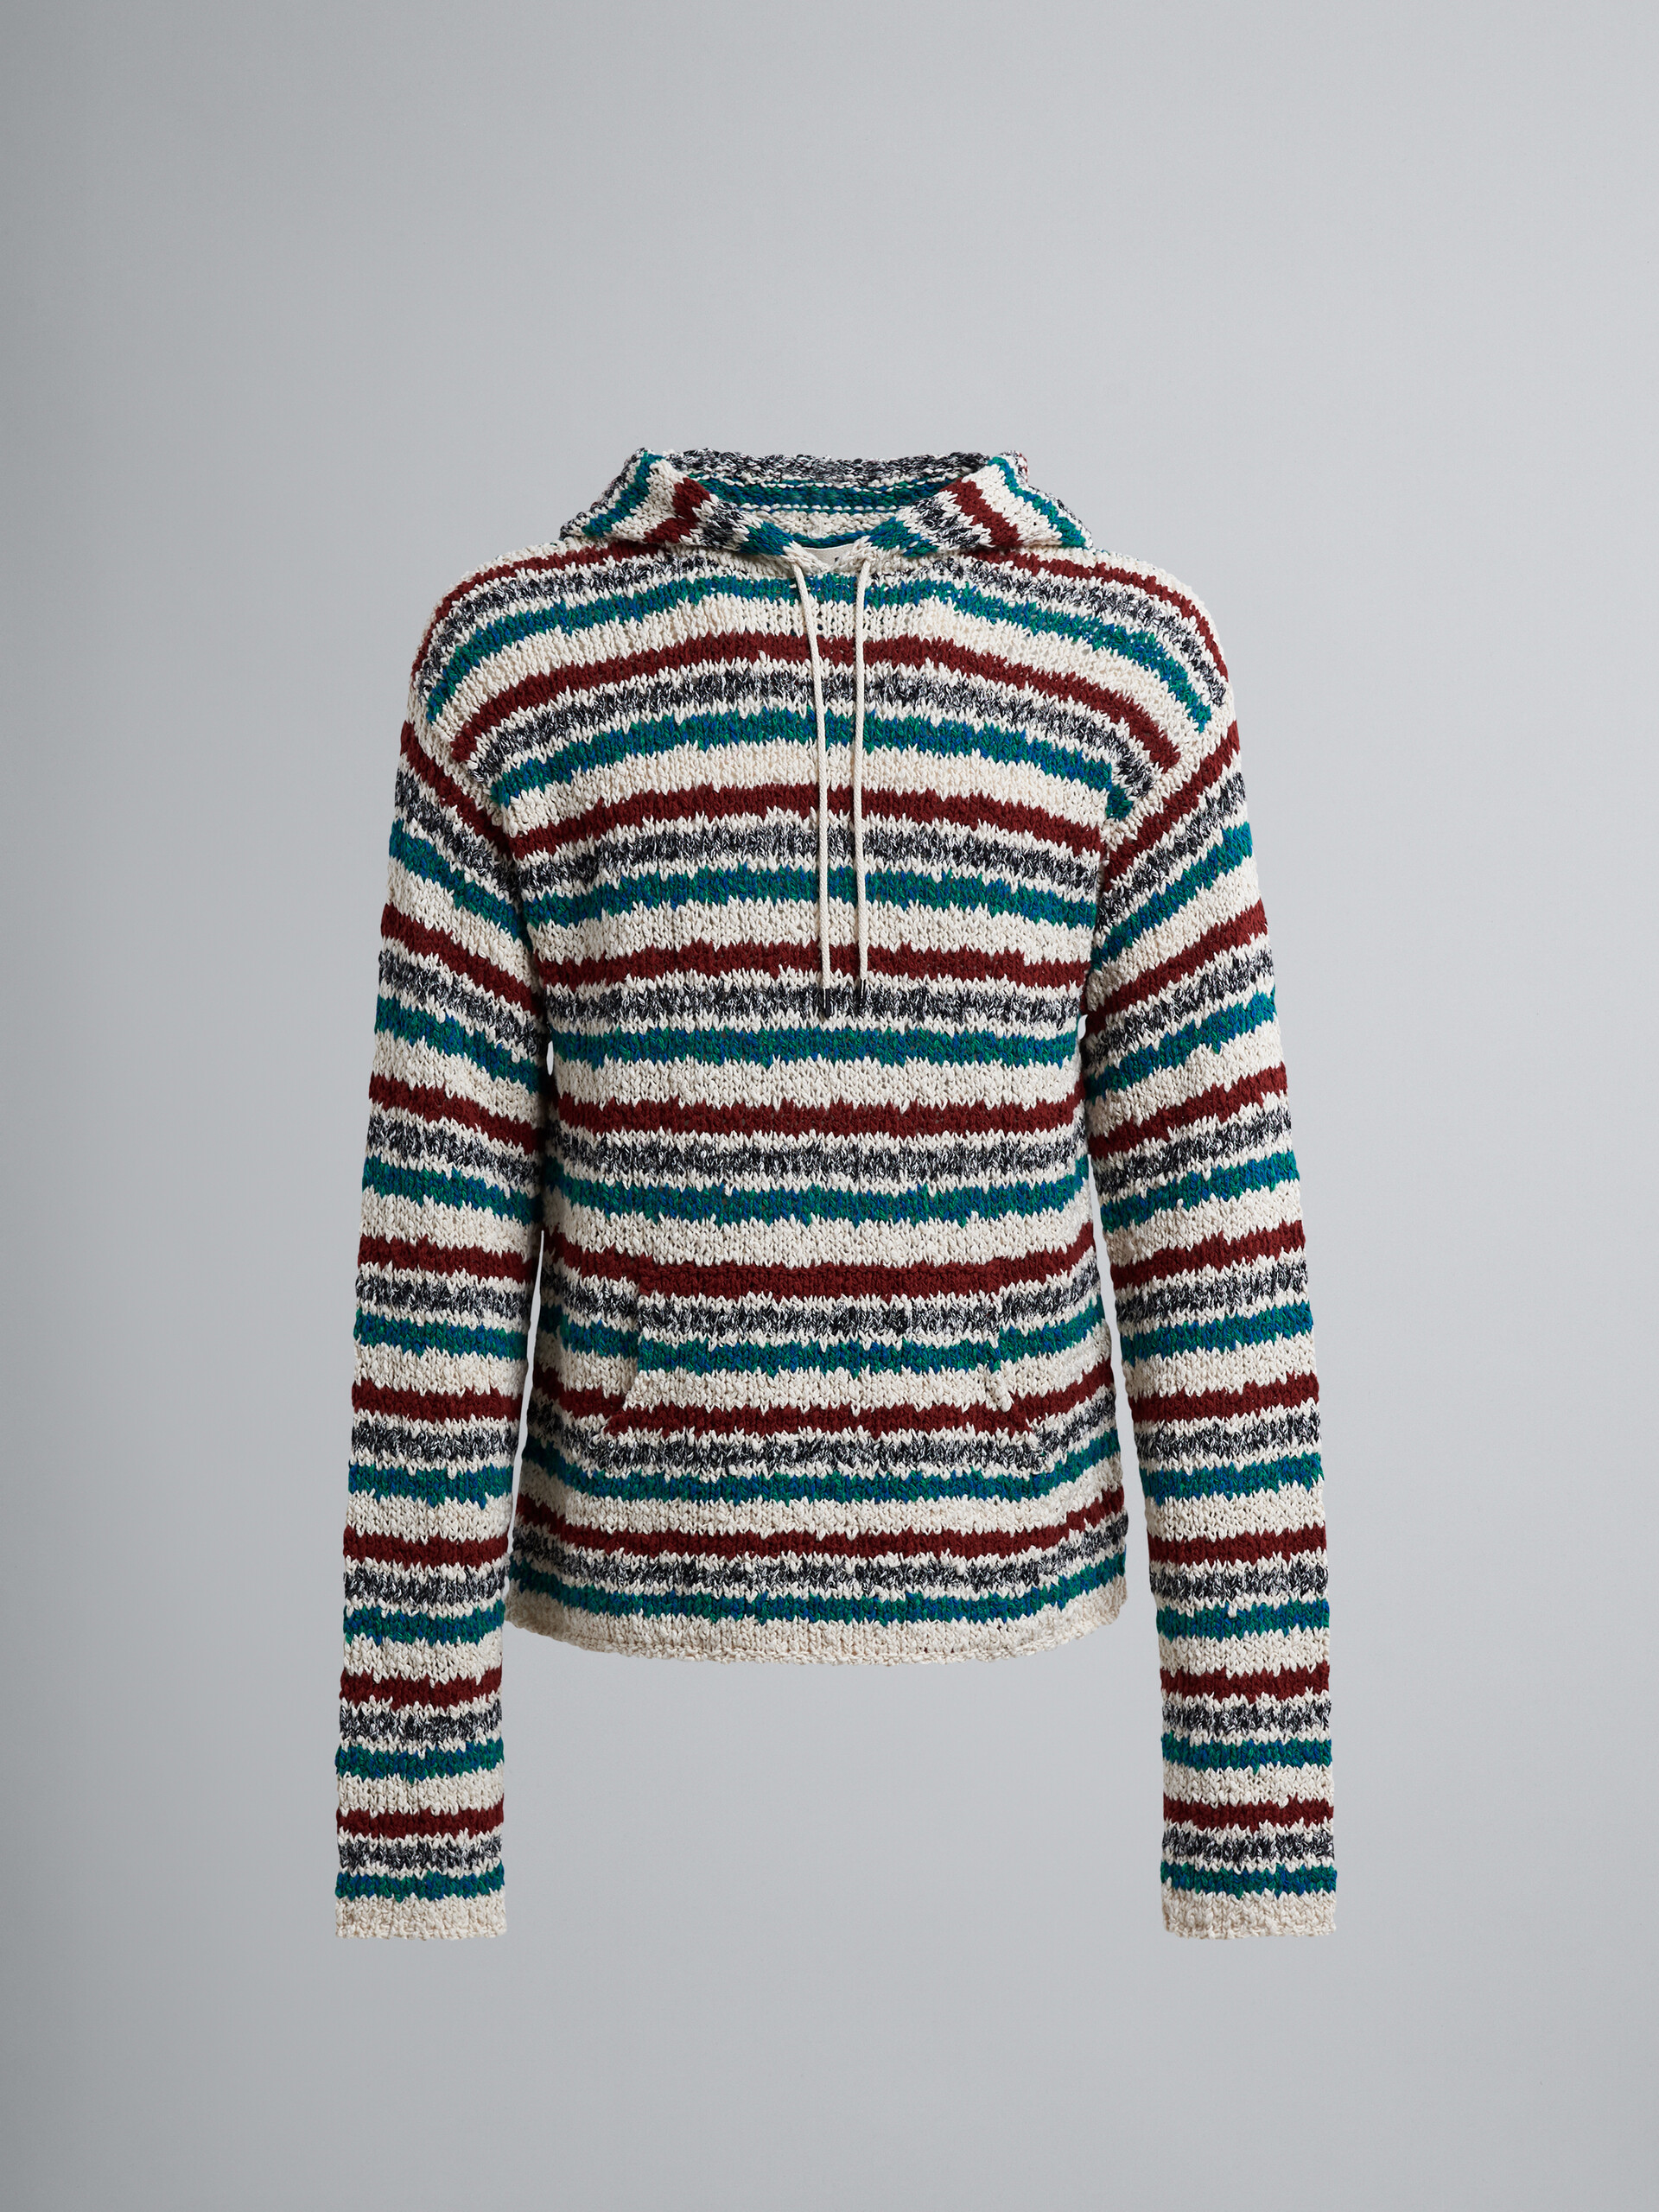 Striped twisted cotton sweater - Pullovers - Image 1